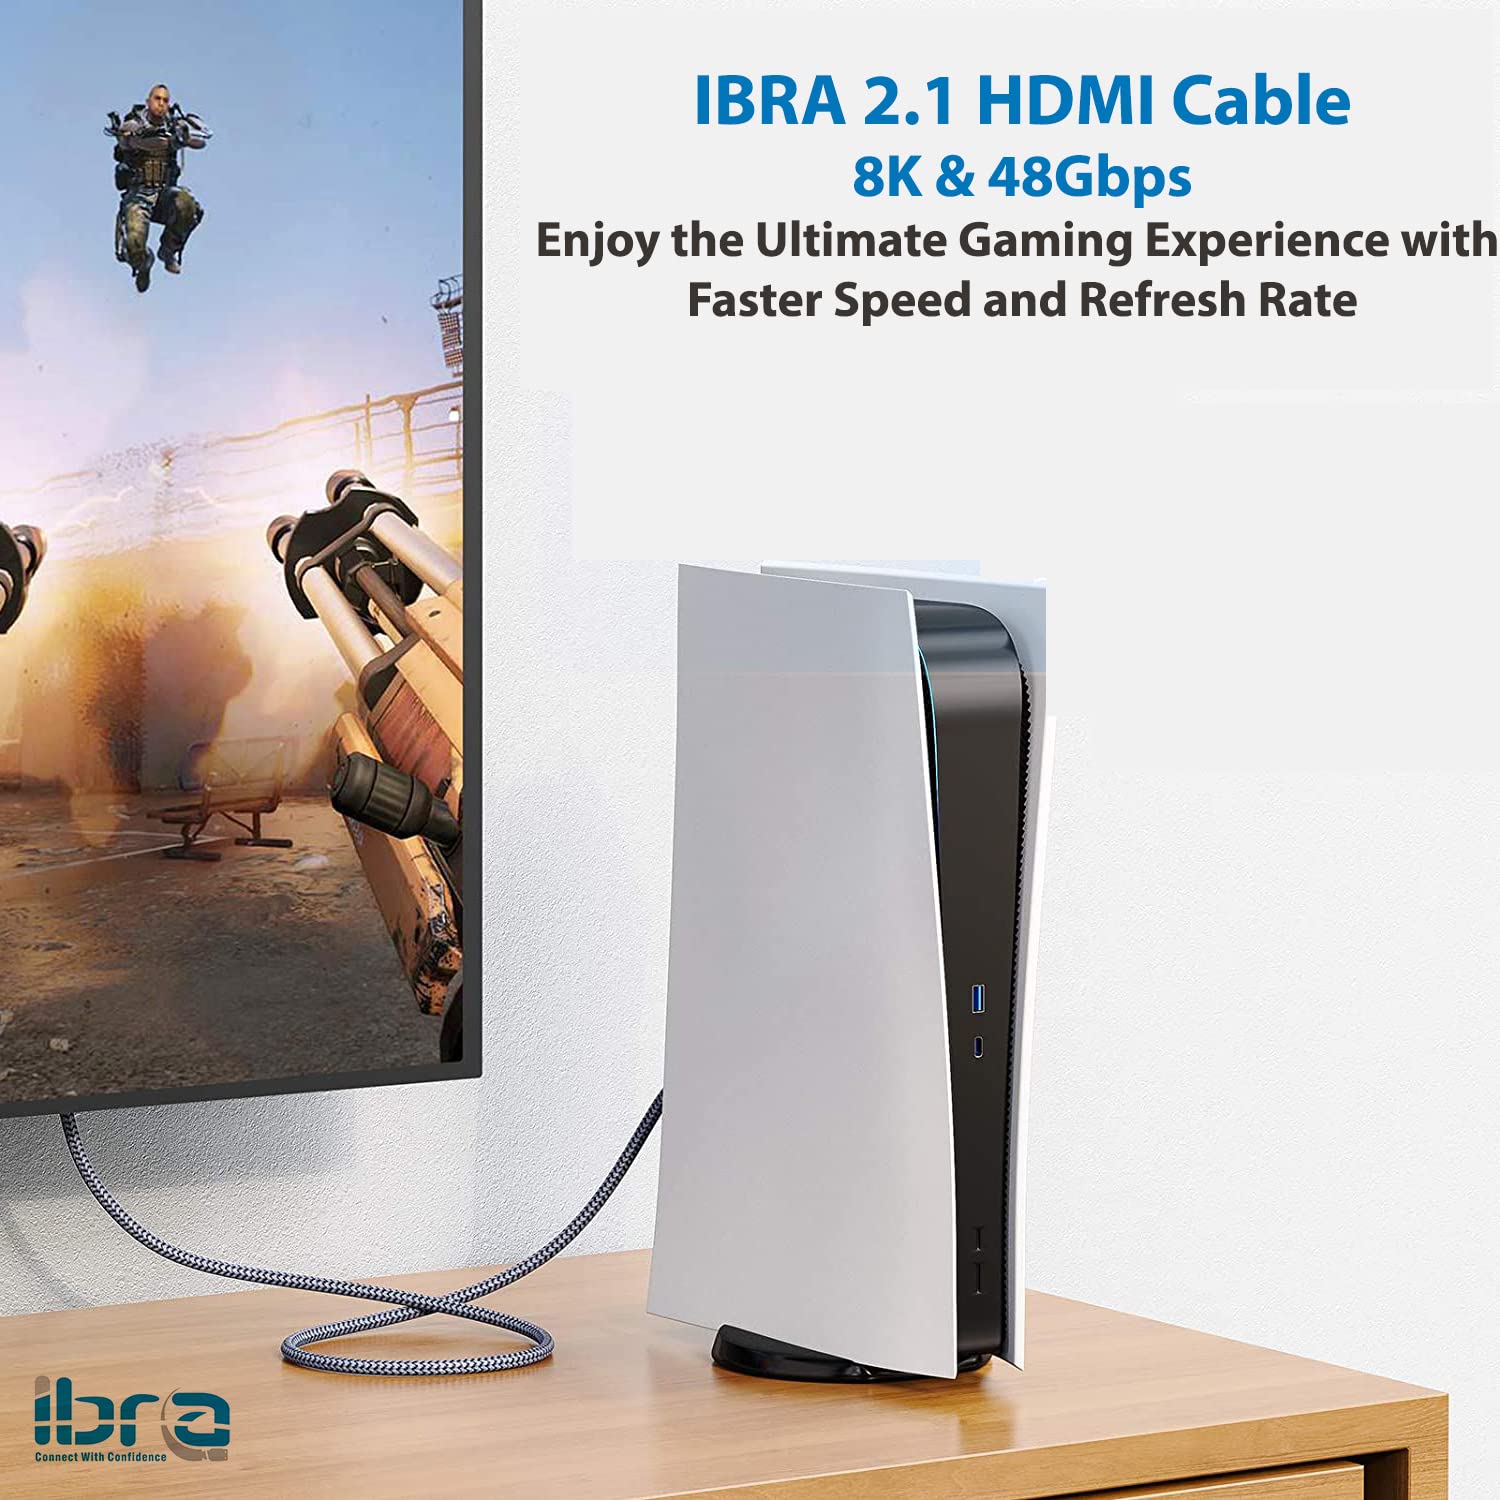 2.1 HDMI Cable 8K, 2M Ultra High-Speed 48Gbps Lead - IBRA Basics Series